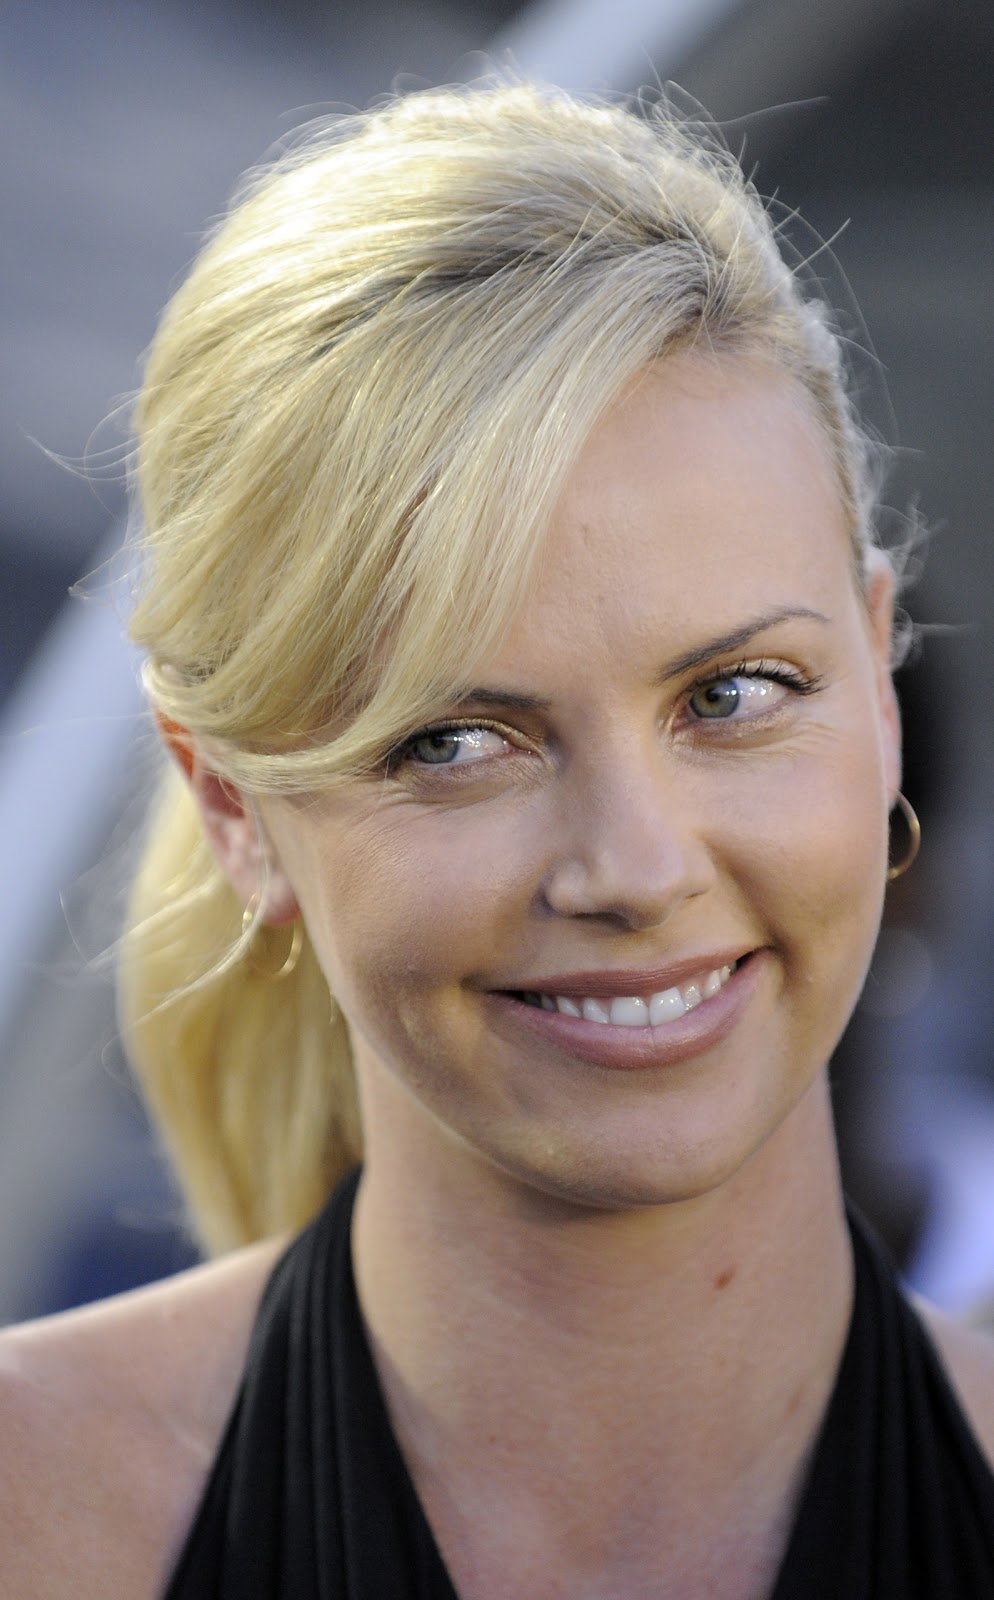 A new life hartz: Charlize Theron Different Hairstyle